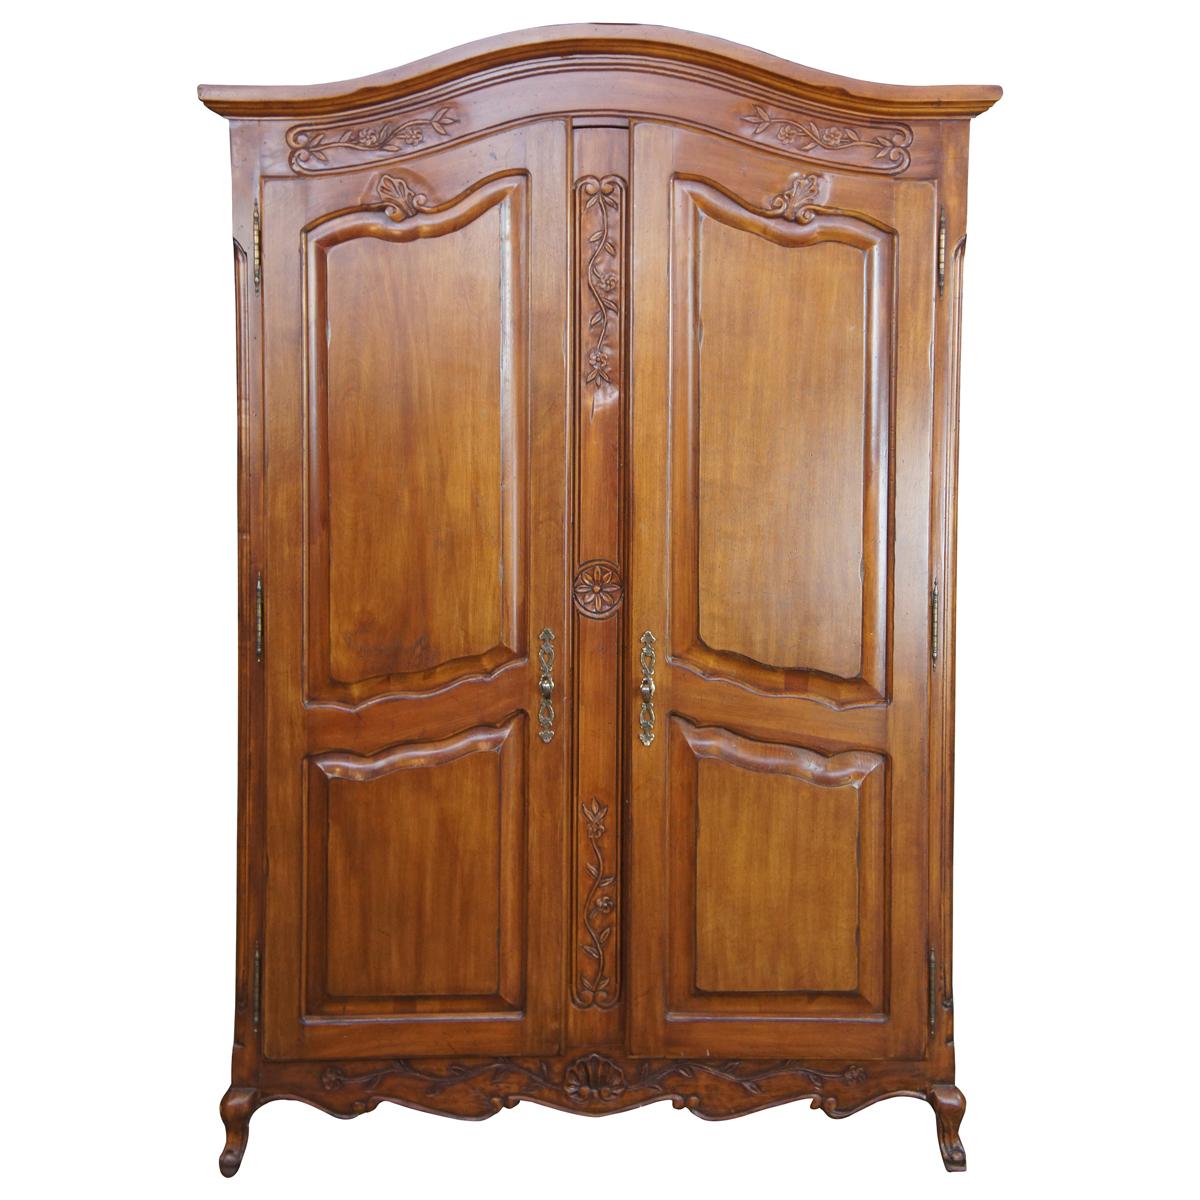 Vintage Walnut French Country Clothing Armoire Wardrobe Closet TV Cabinet